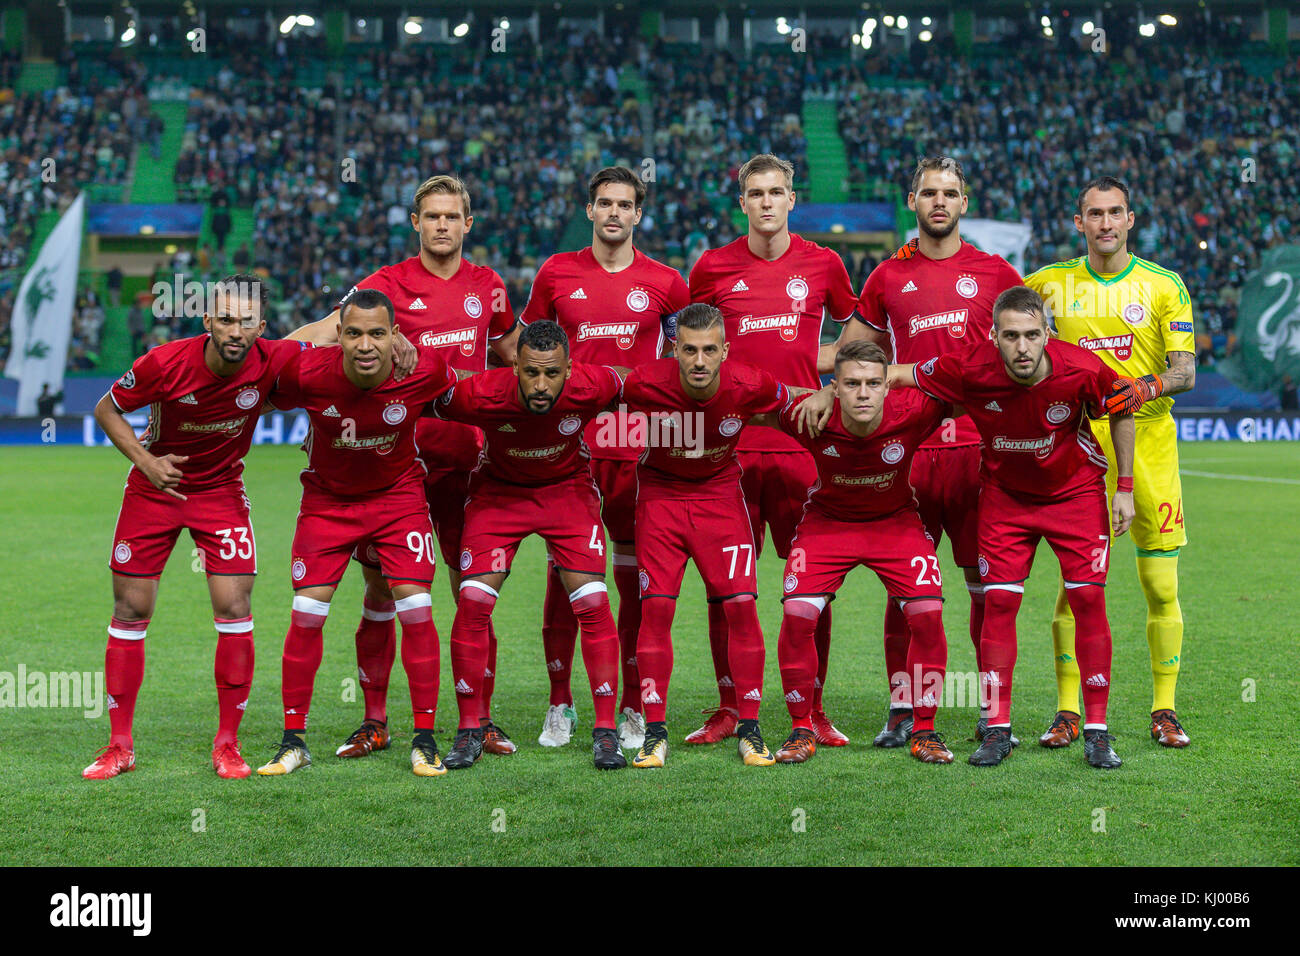 Lisbon, Portugal. 22nd Nov, 2017. November 22, 2017. Lisbon, Portugal. Olympiakos starting team for the game of the 5th round of the UEFA Champions League Group D, Sporting v Olympiakos Credit: Alexandre de Sousa/Alamy Live News Stock Photo